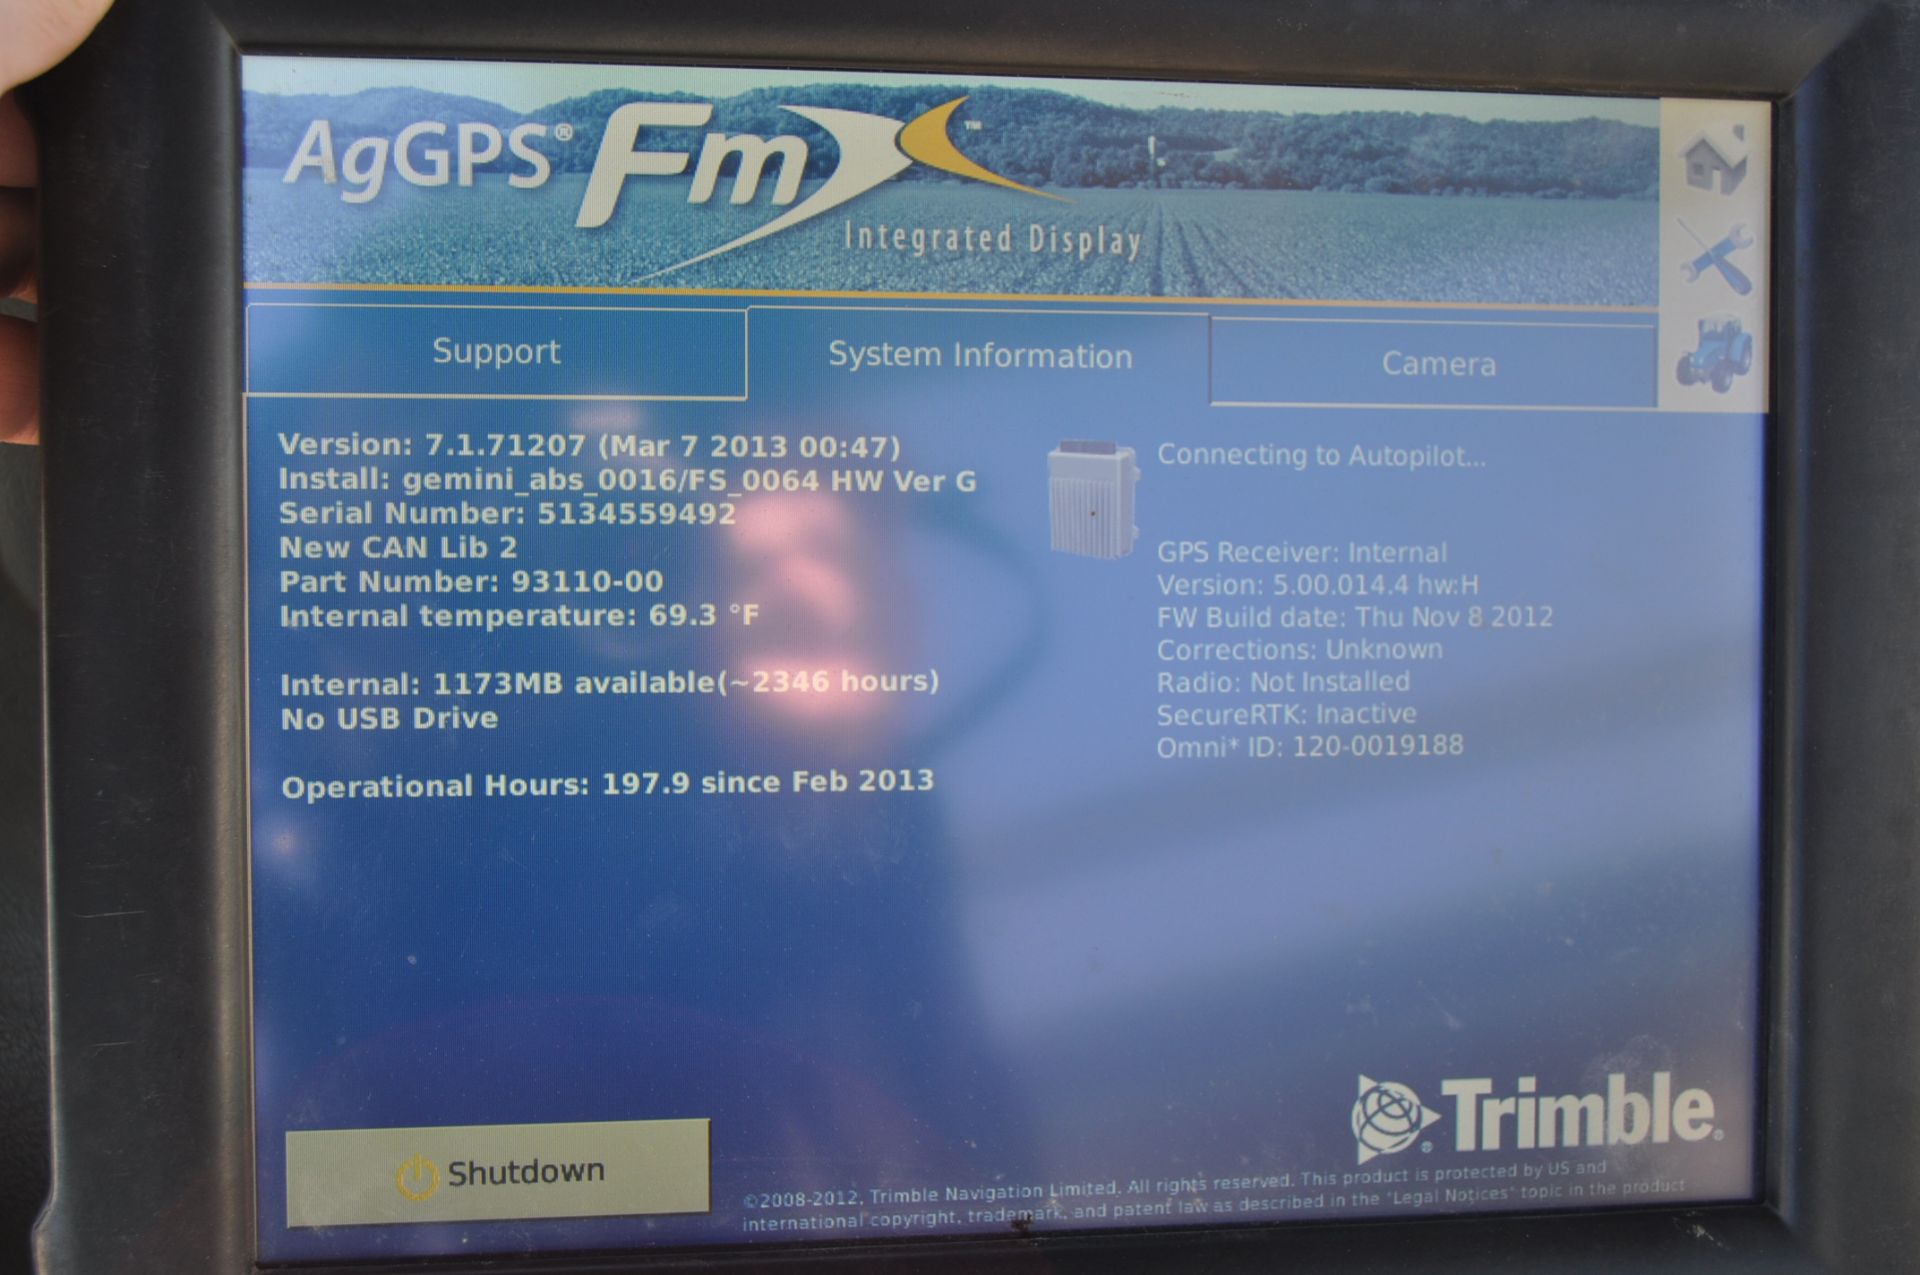 Trimble FMX display unlocked to CenterPoint RTK, OmniSTAR HP/XP/G2 Corrections, and GLONASS - Image 3 of 5